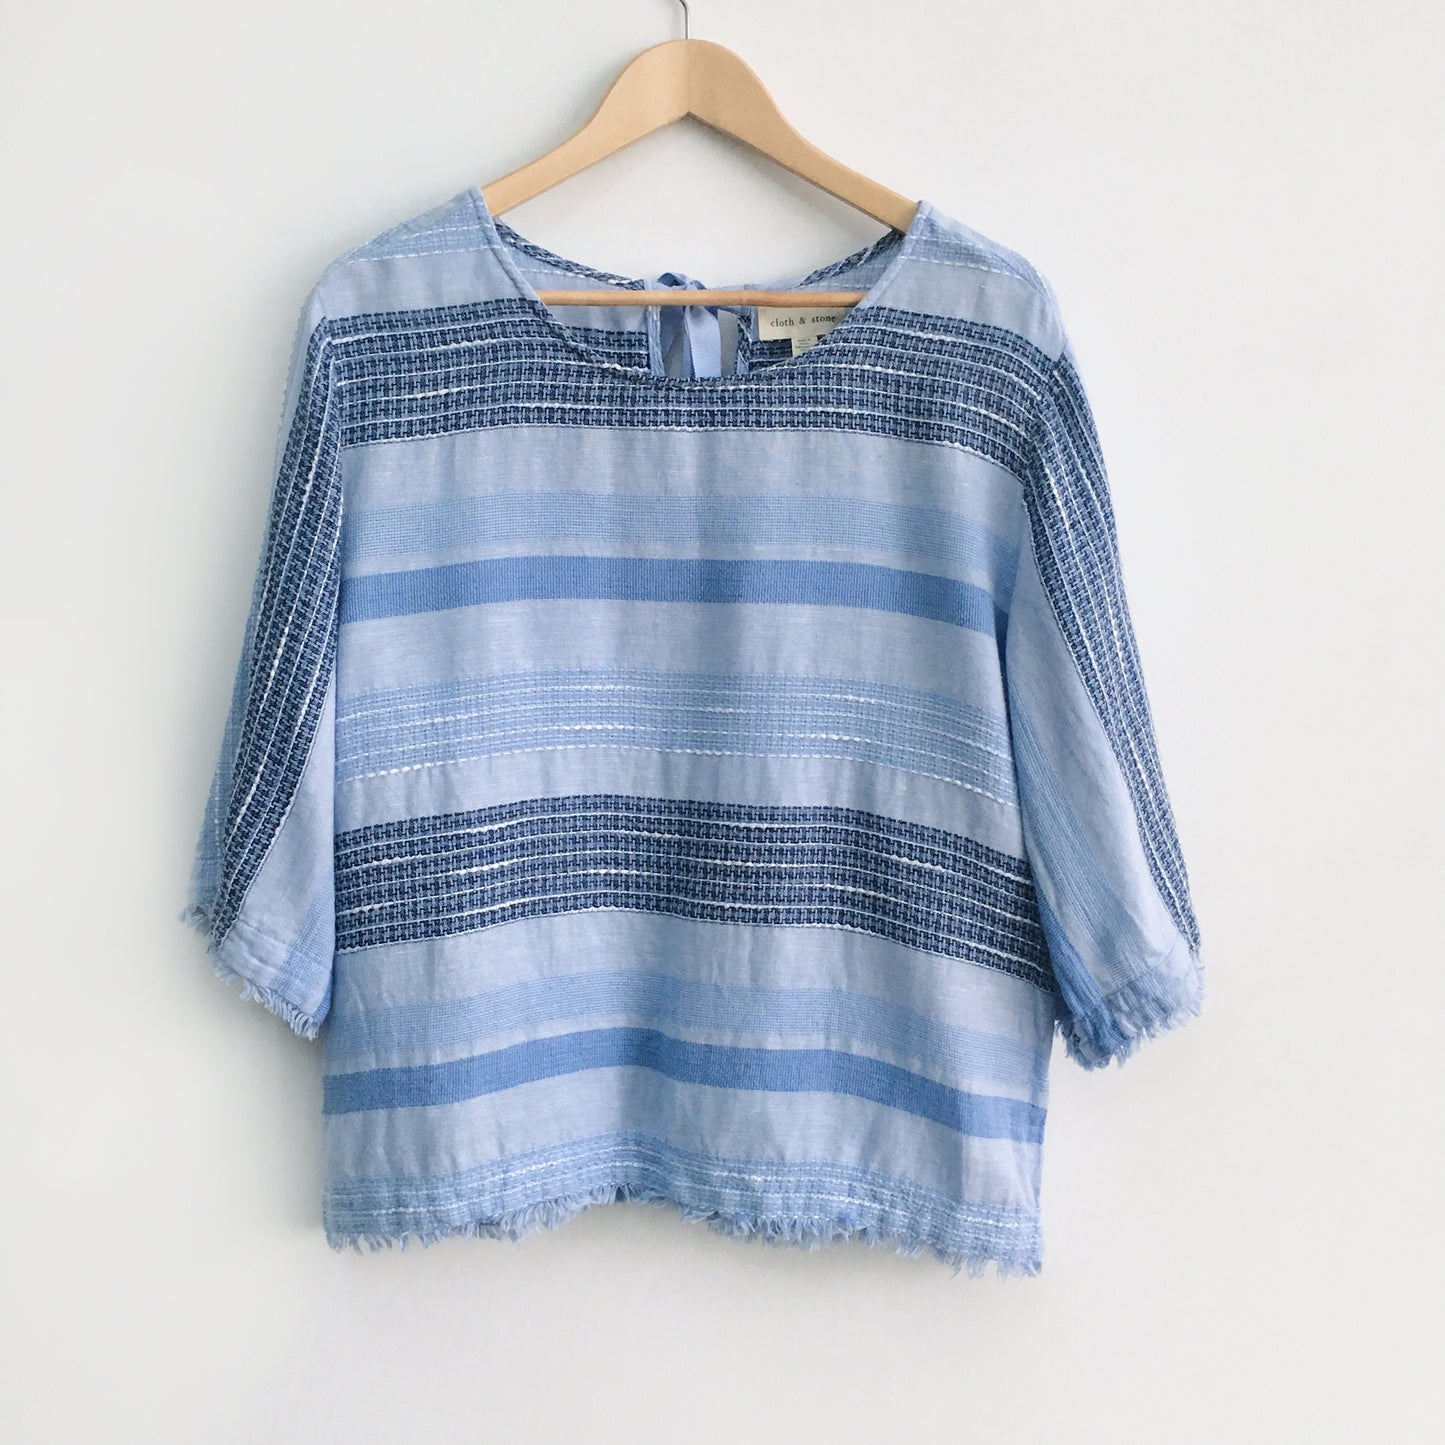 Cloth &amp; Stone Linen Weave top - size Small